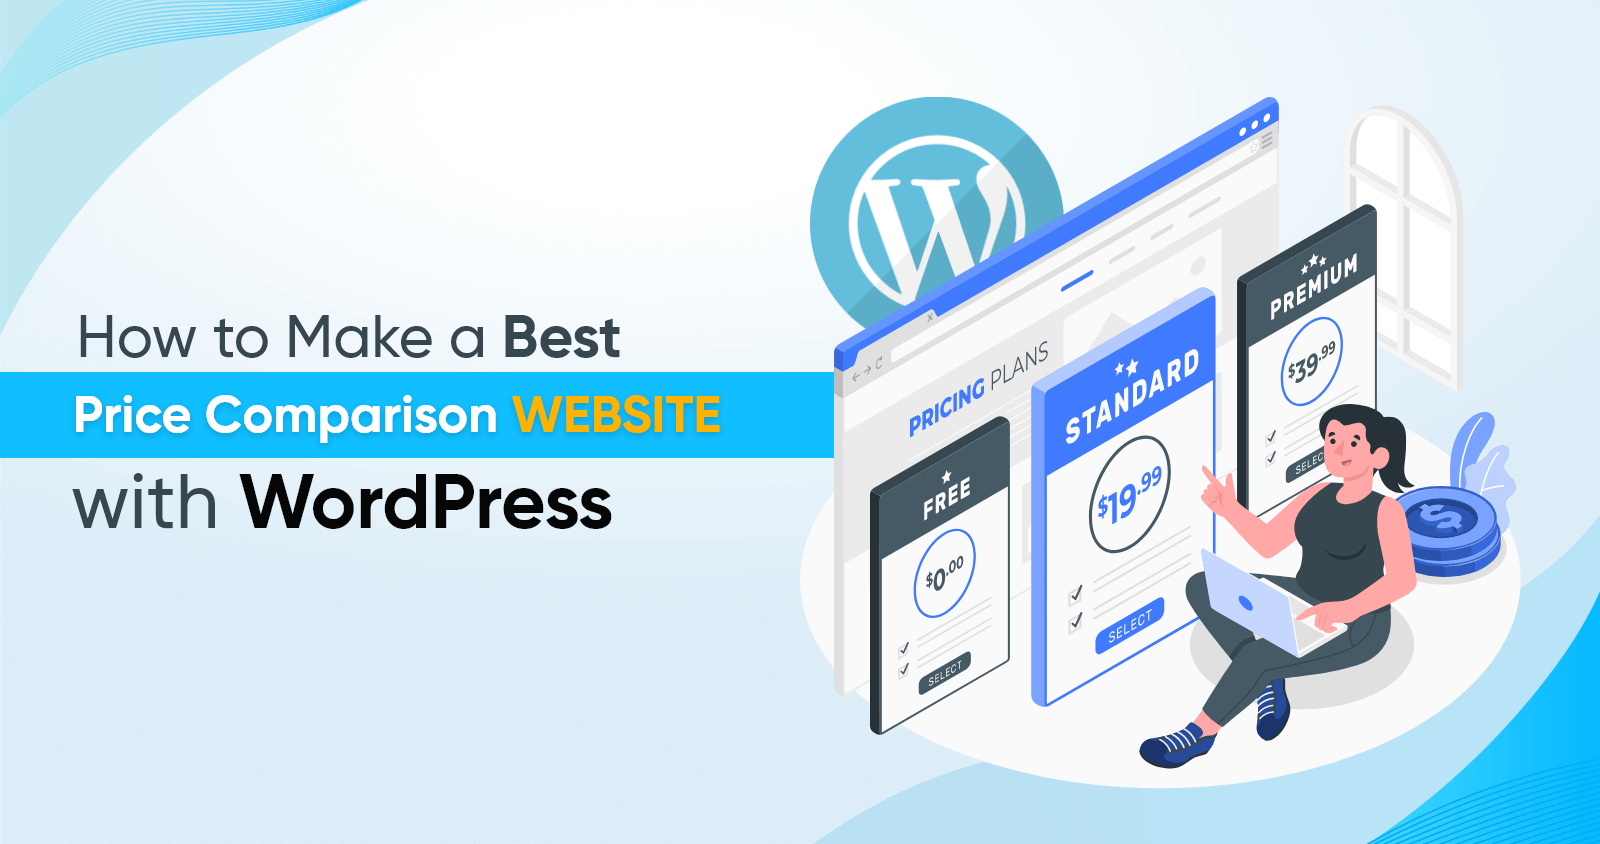 How to make a Best Price Comparison Website with WordPress